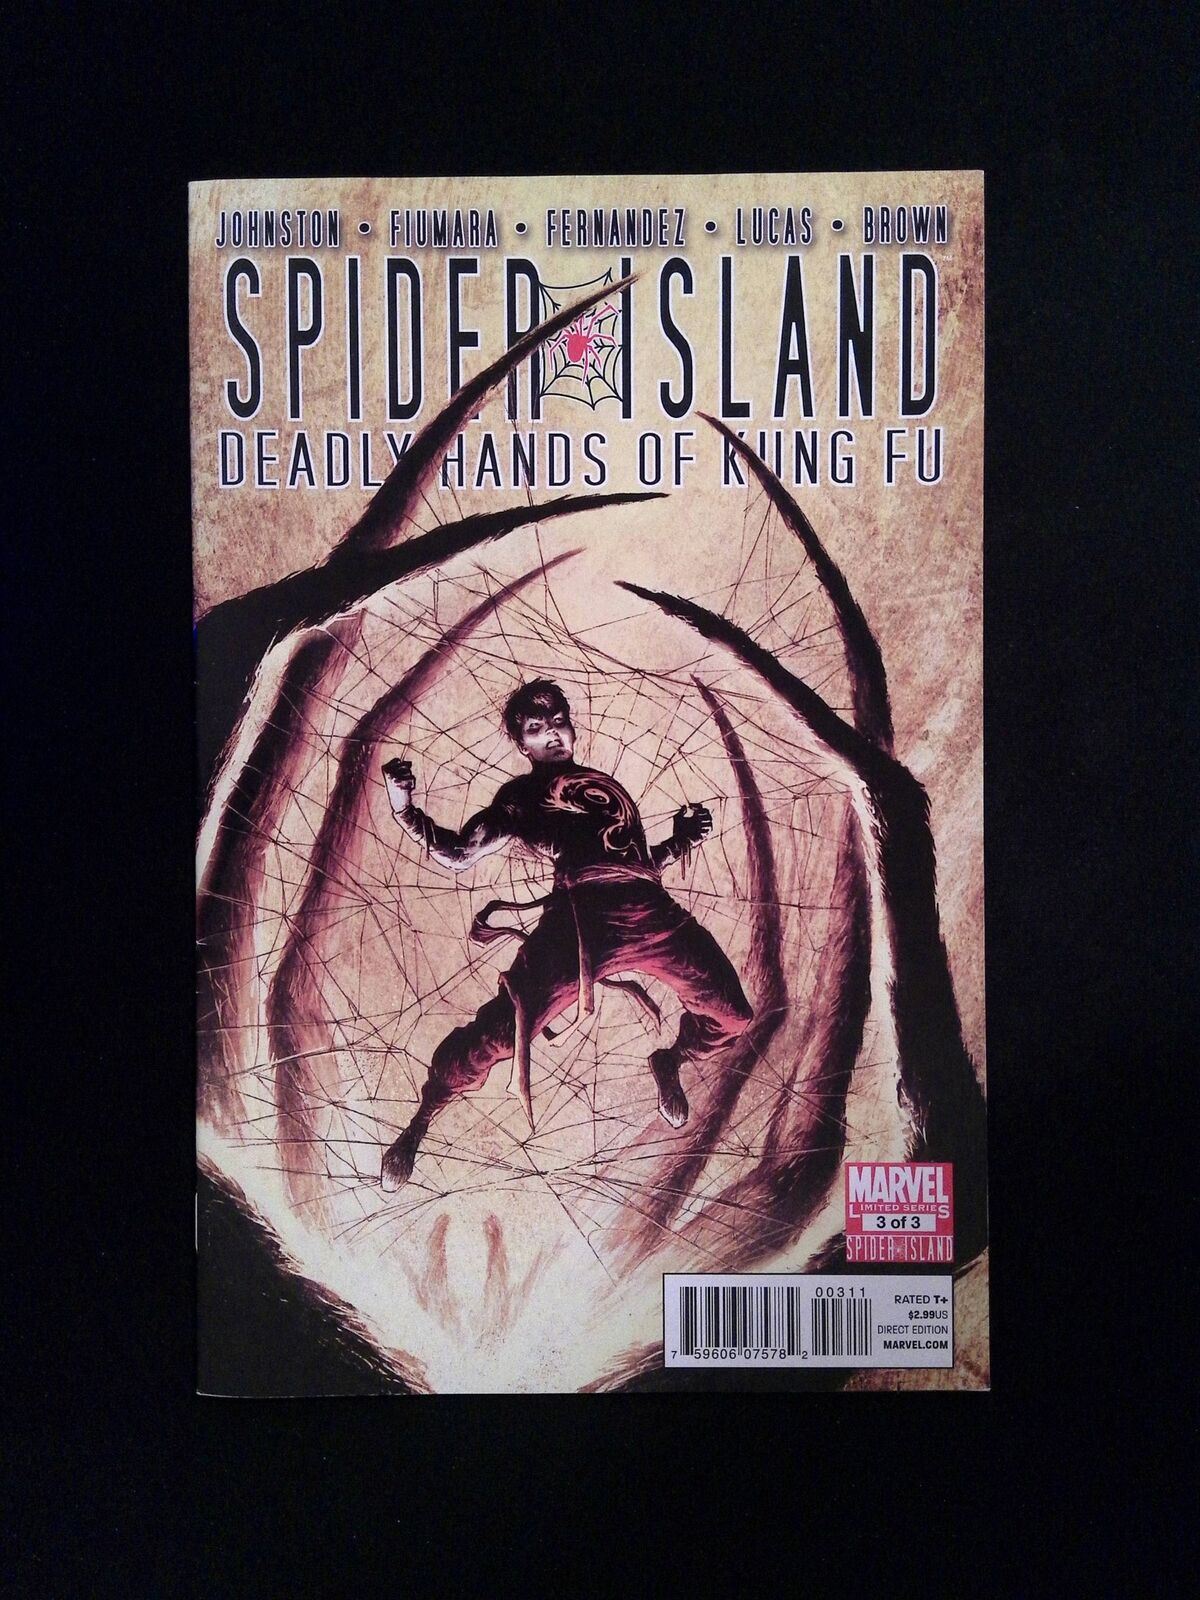 Spider-Island Deadly Hands Of Kung Fu #3  Marvel Comics 2011 VF+